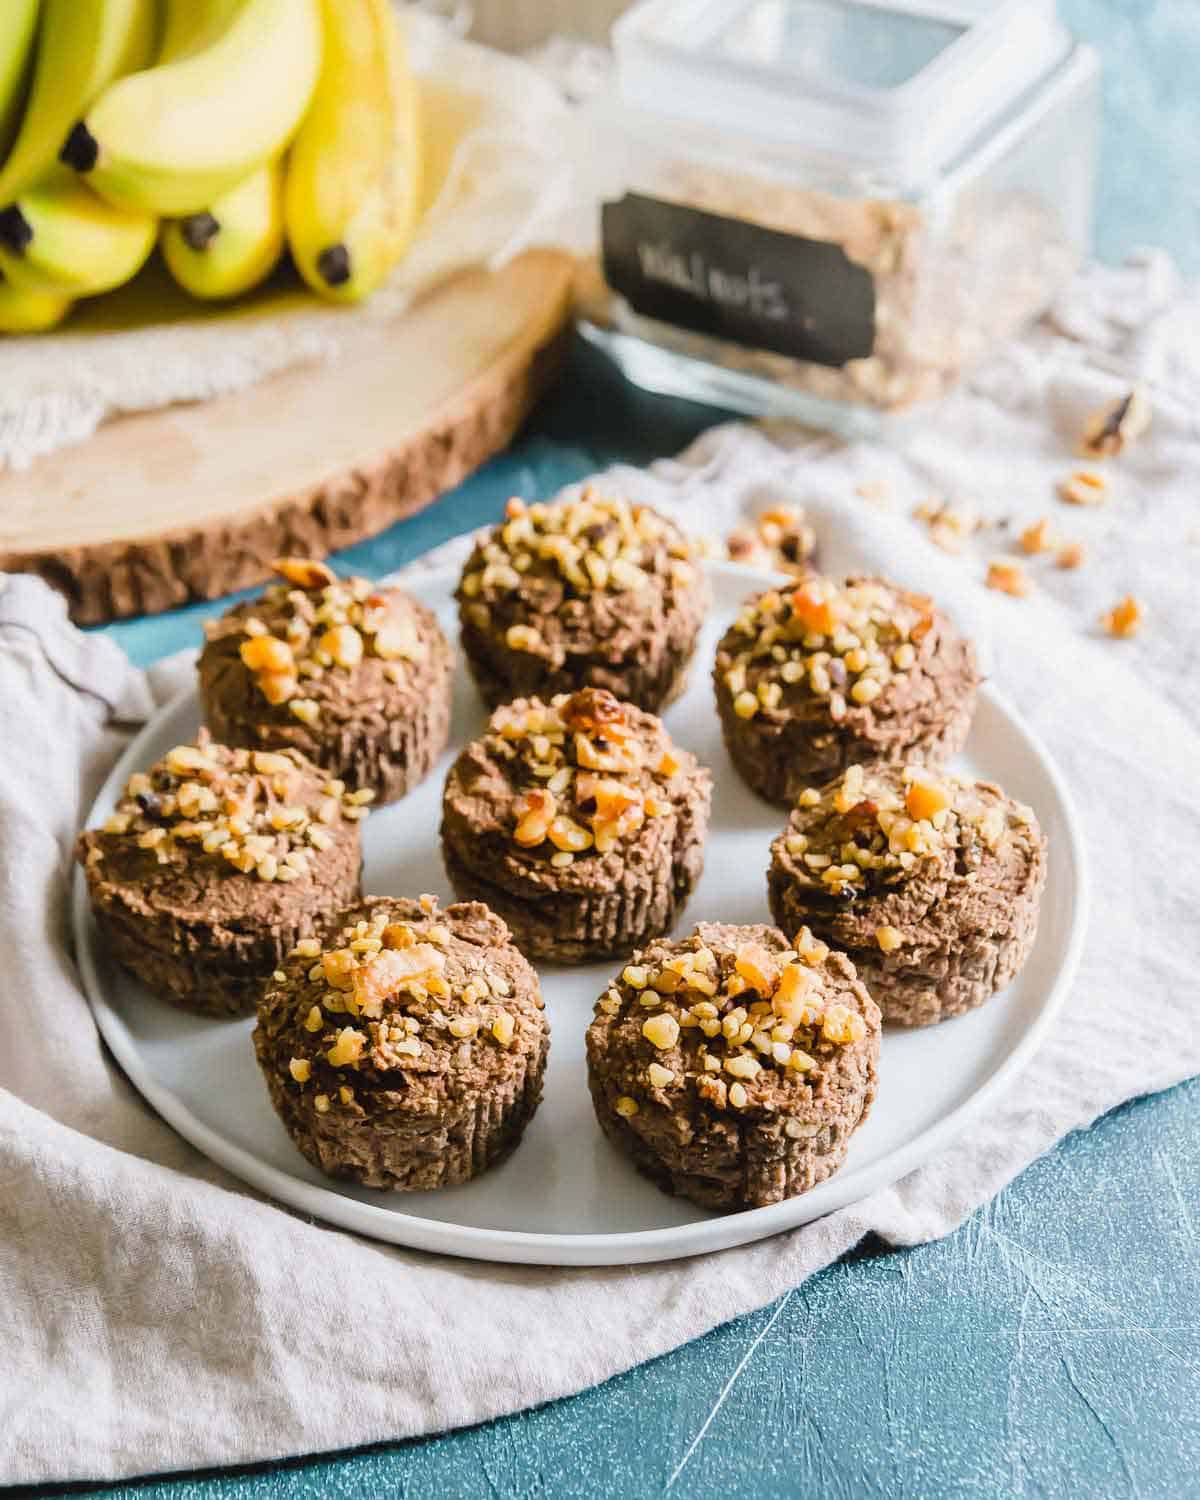 These banana nut almond pulp muffins are a great way to use leftover almond pulp from making homemade almond milk.